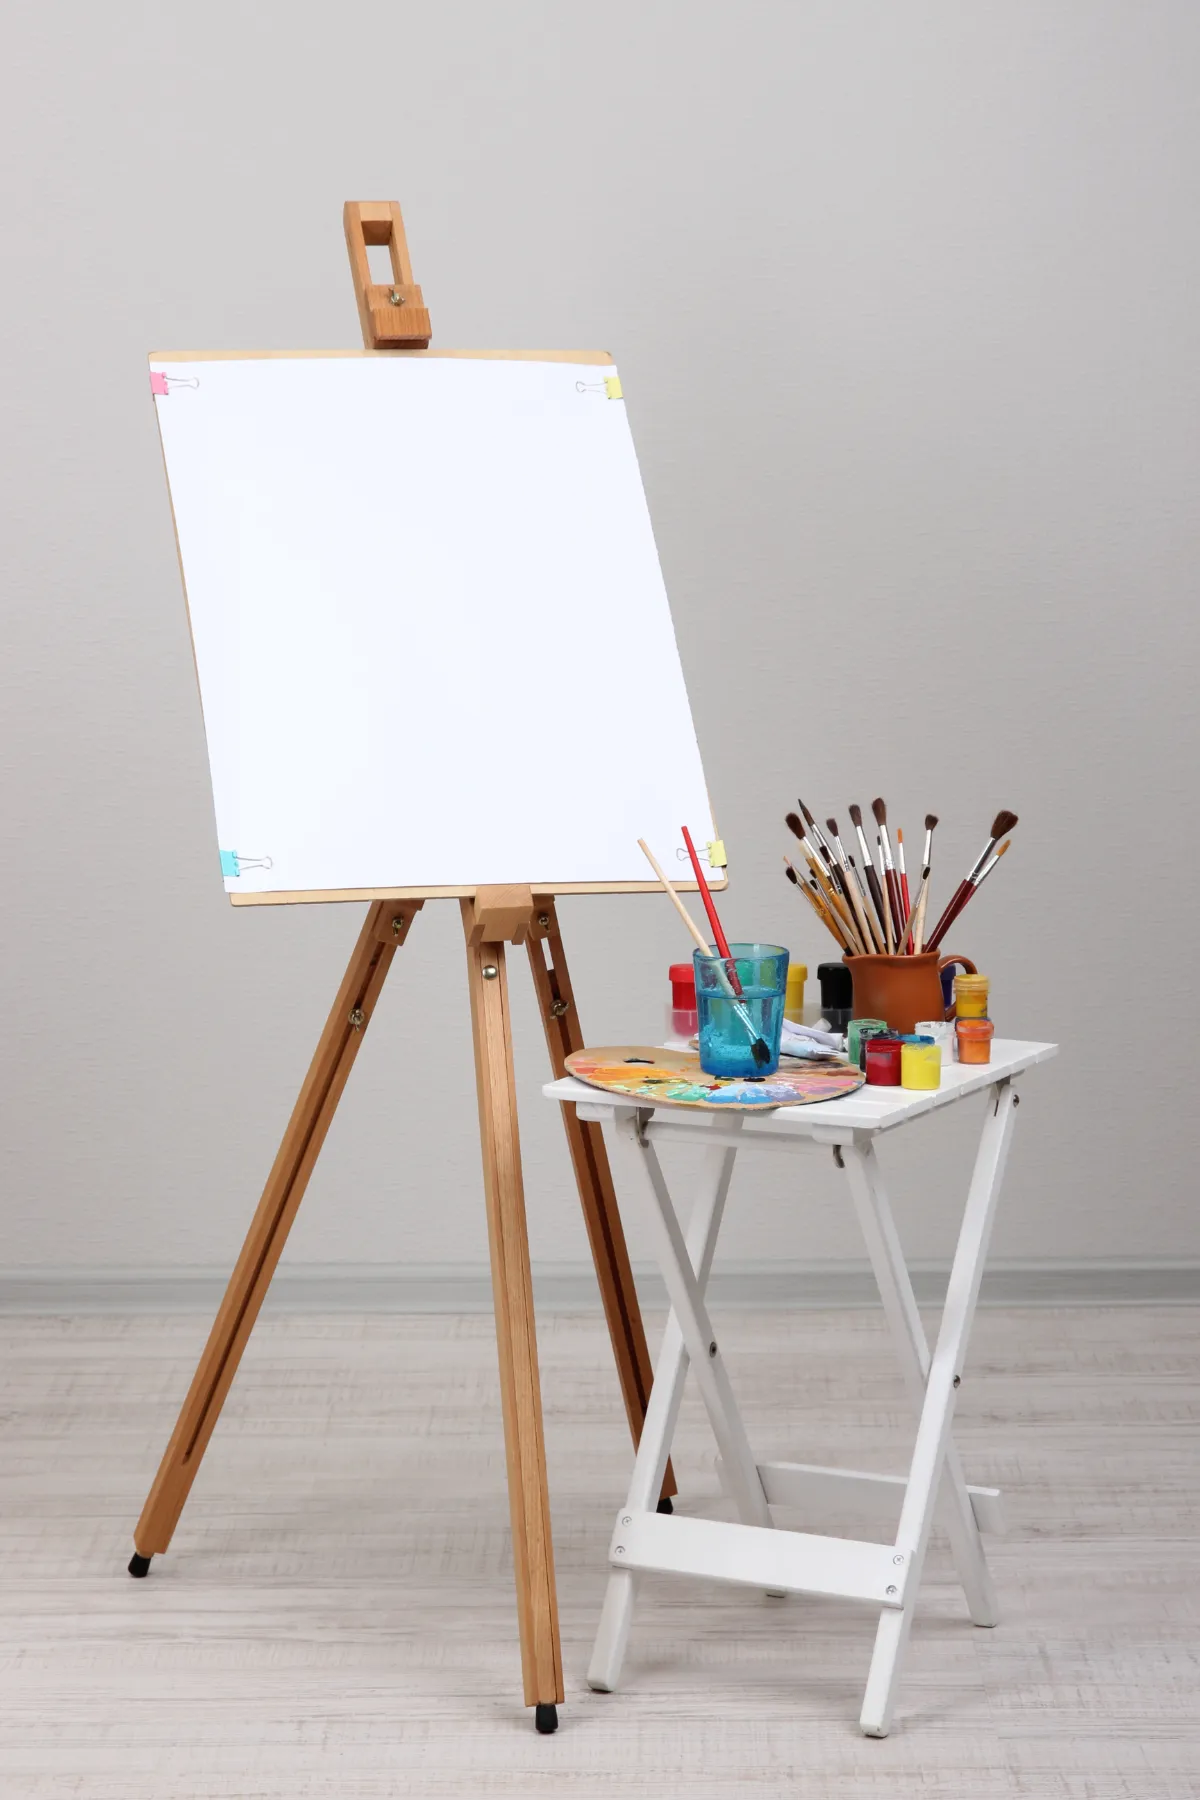 wooden easel with painting supplies